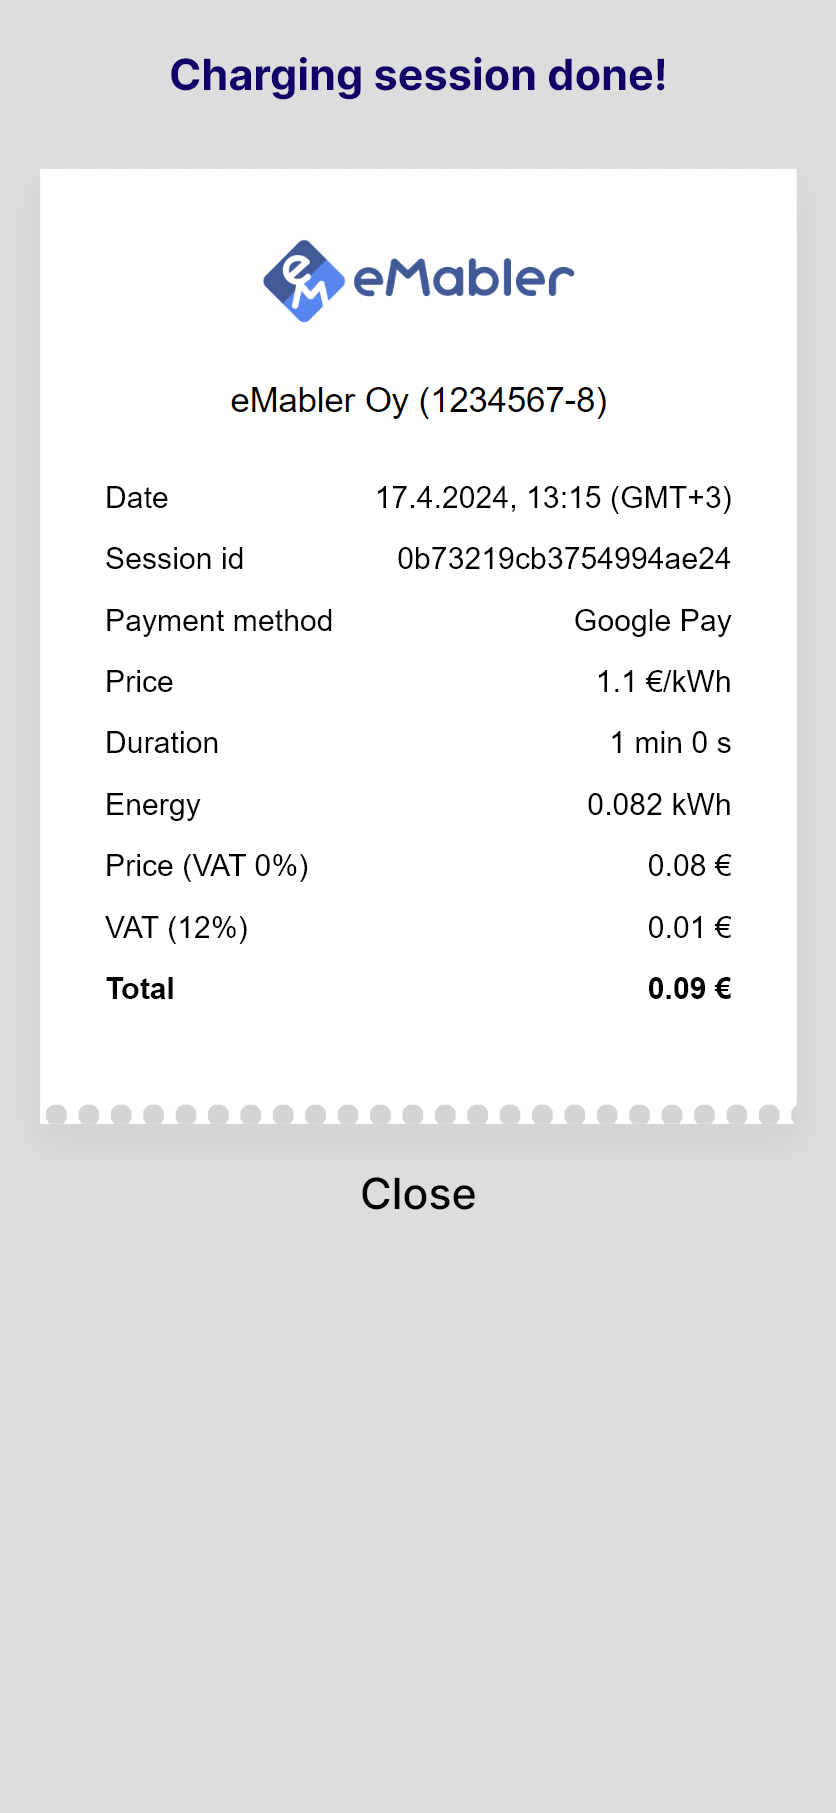 View the receipt of the charging session